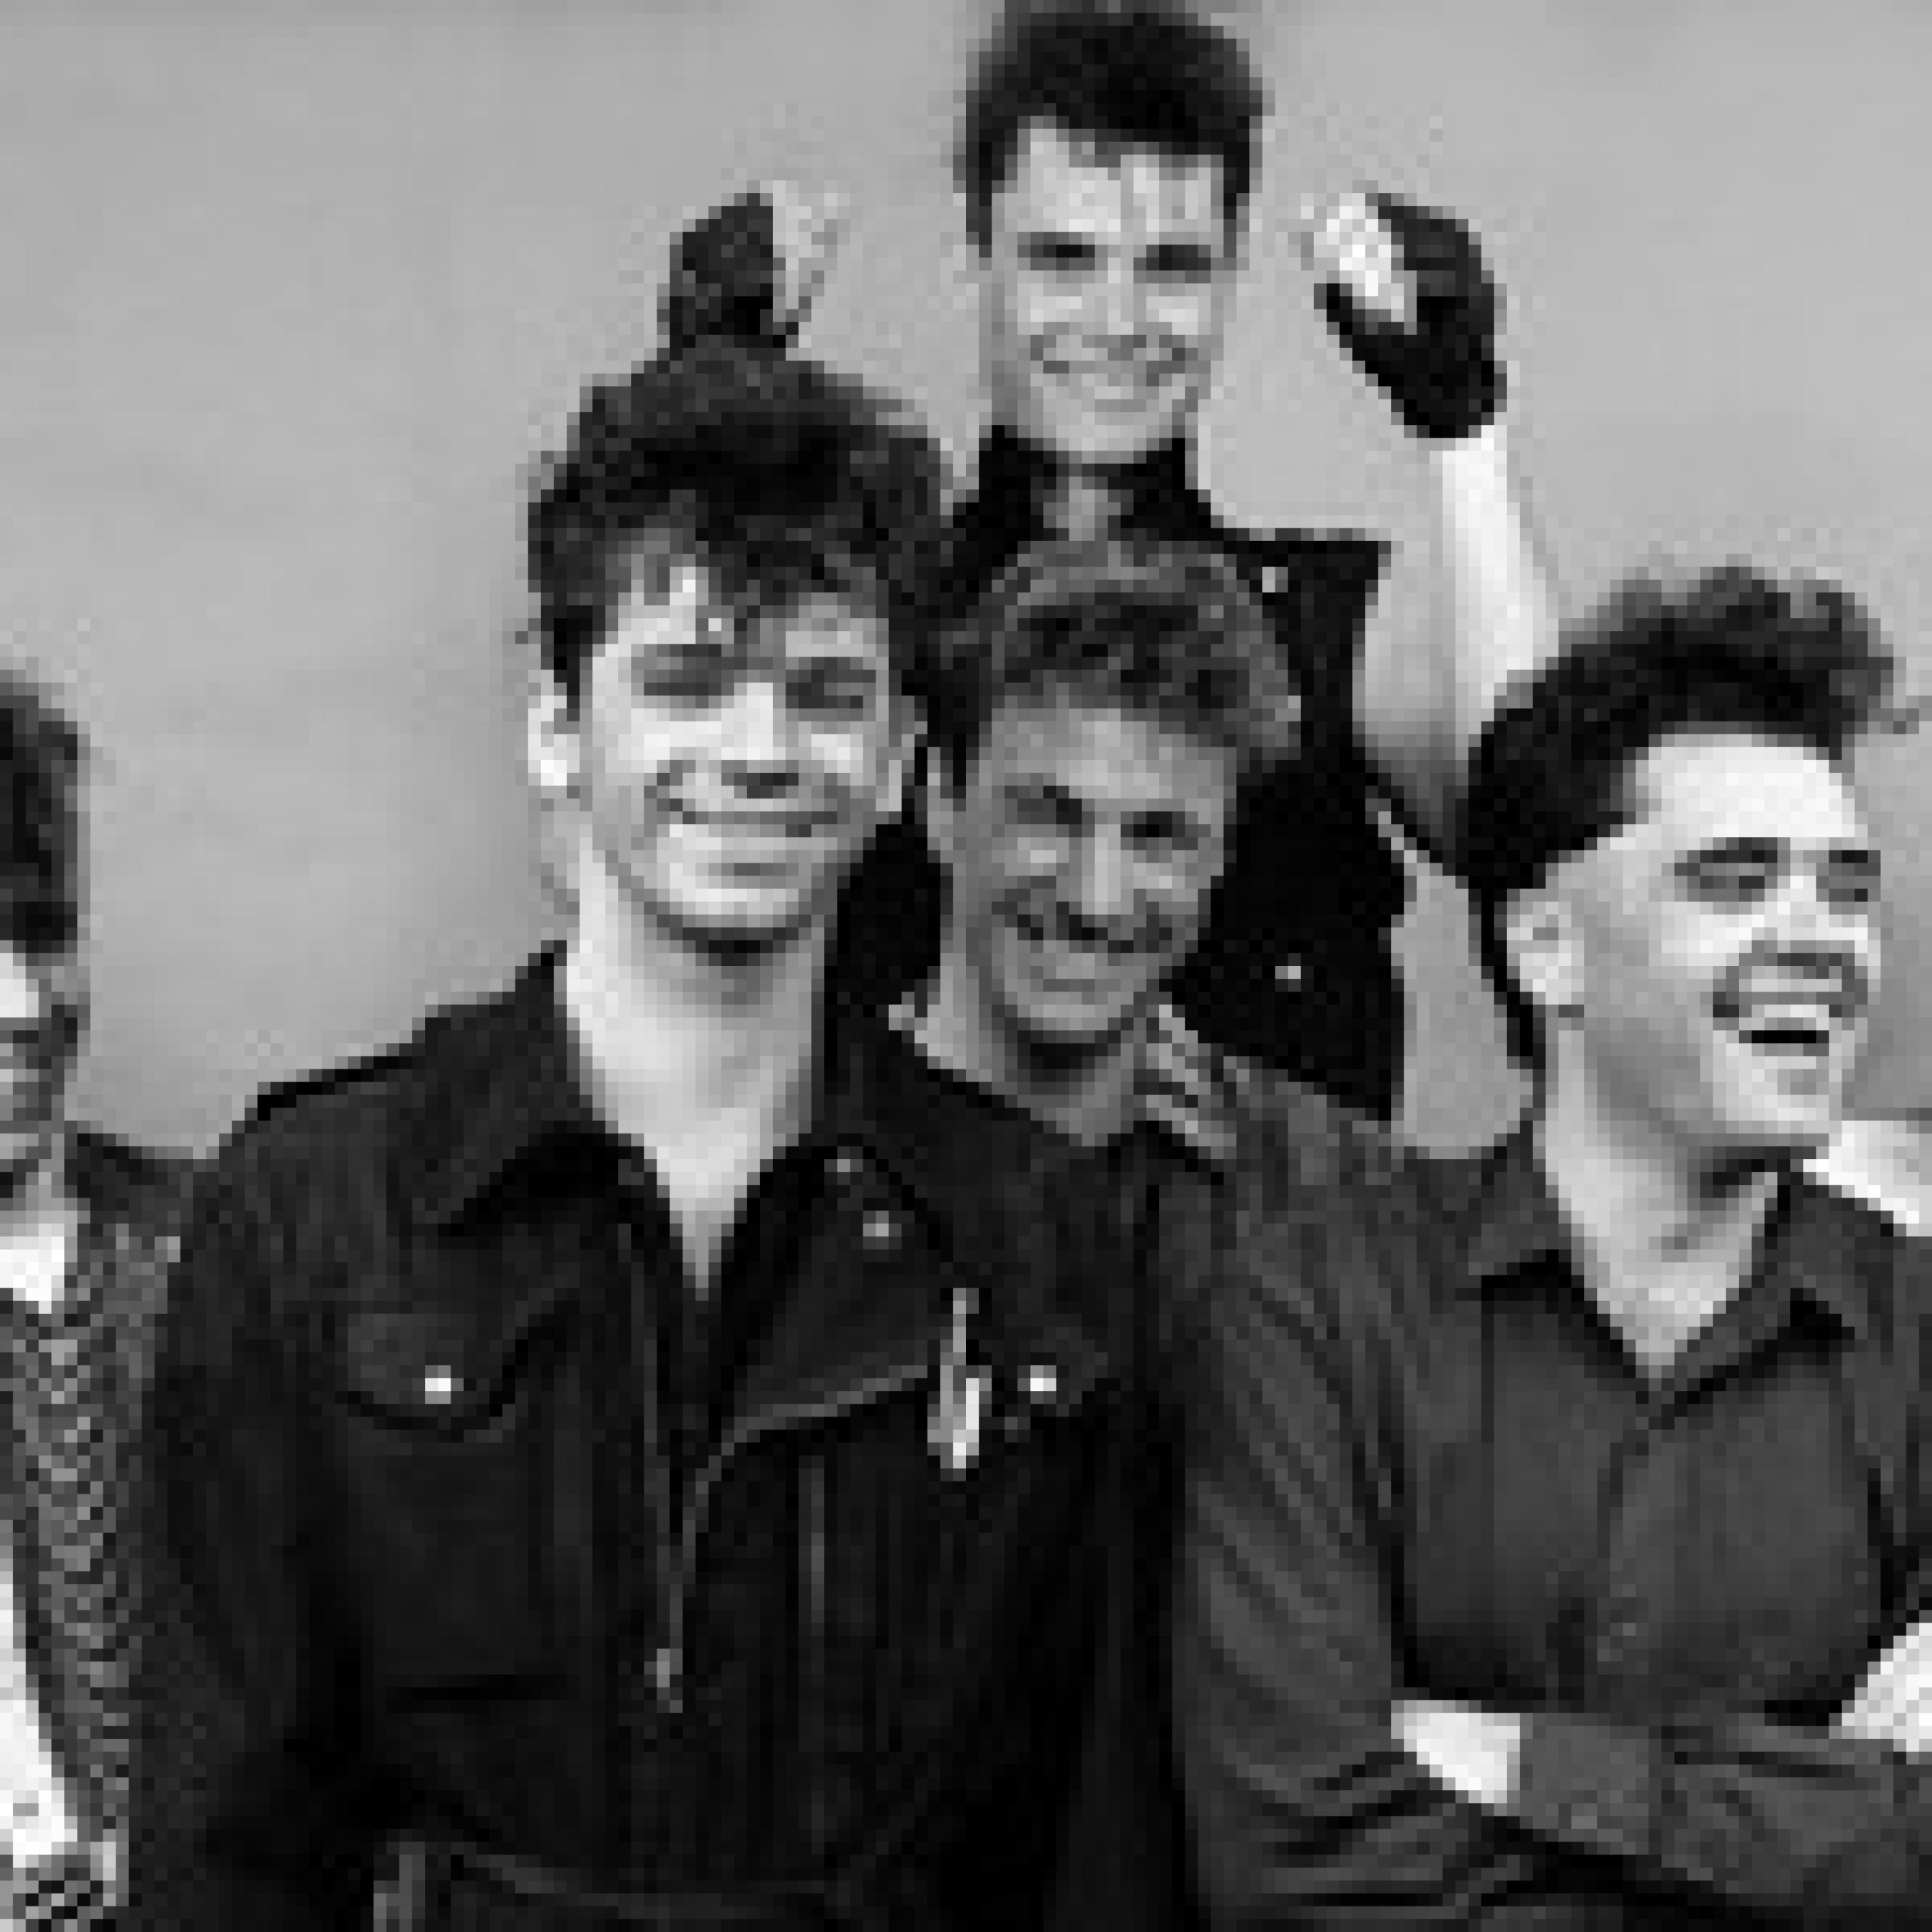 INXS’ ‘The Very Best’ Sets Chart Record In Australia